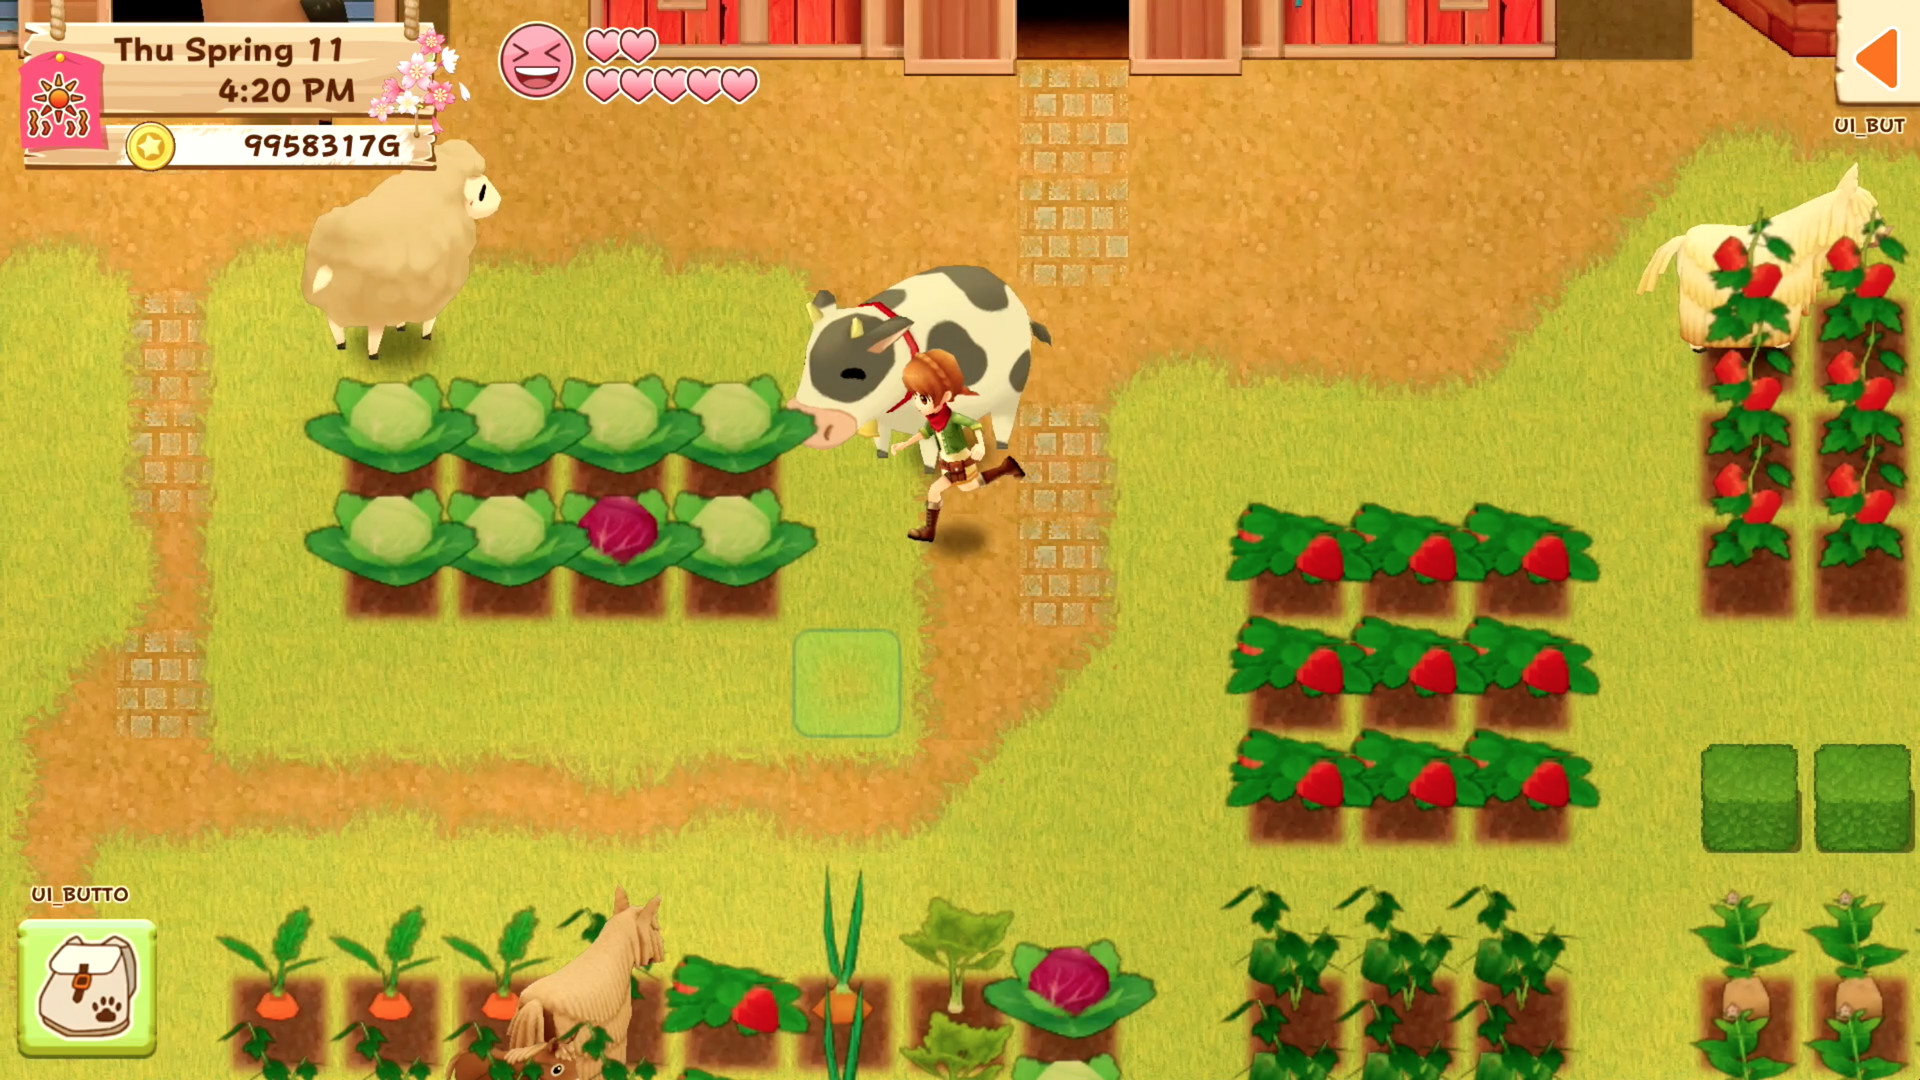 Harvest Moon: Light of Hope Complete Your Set RoW Steam CD Key 15.24 usd